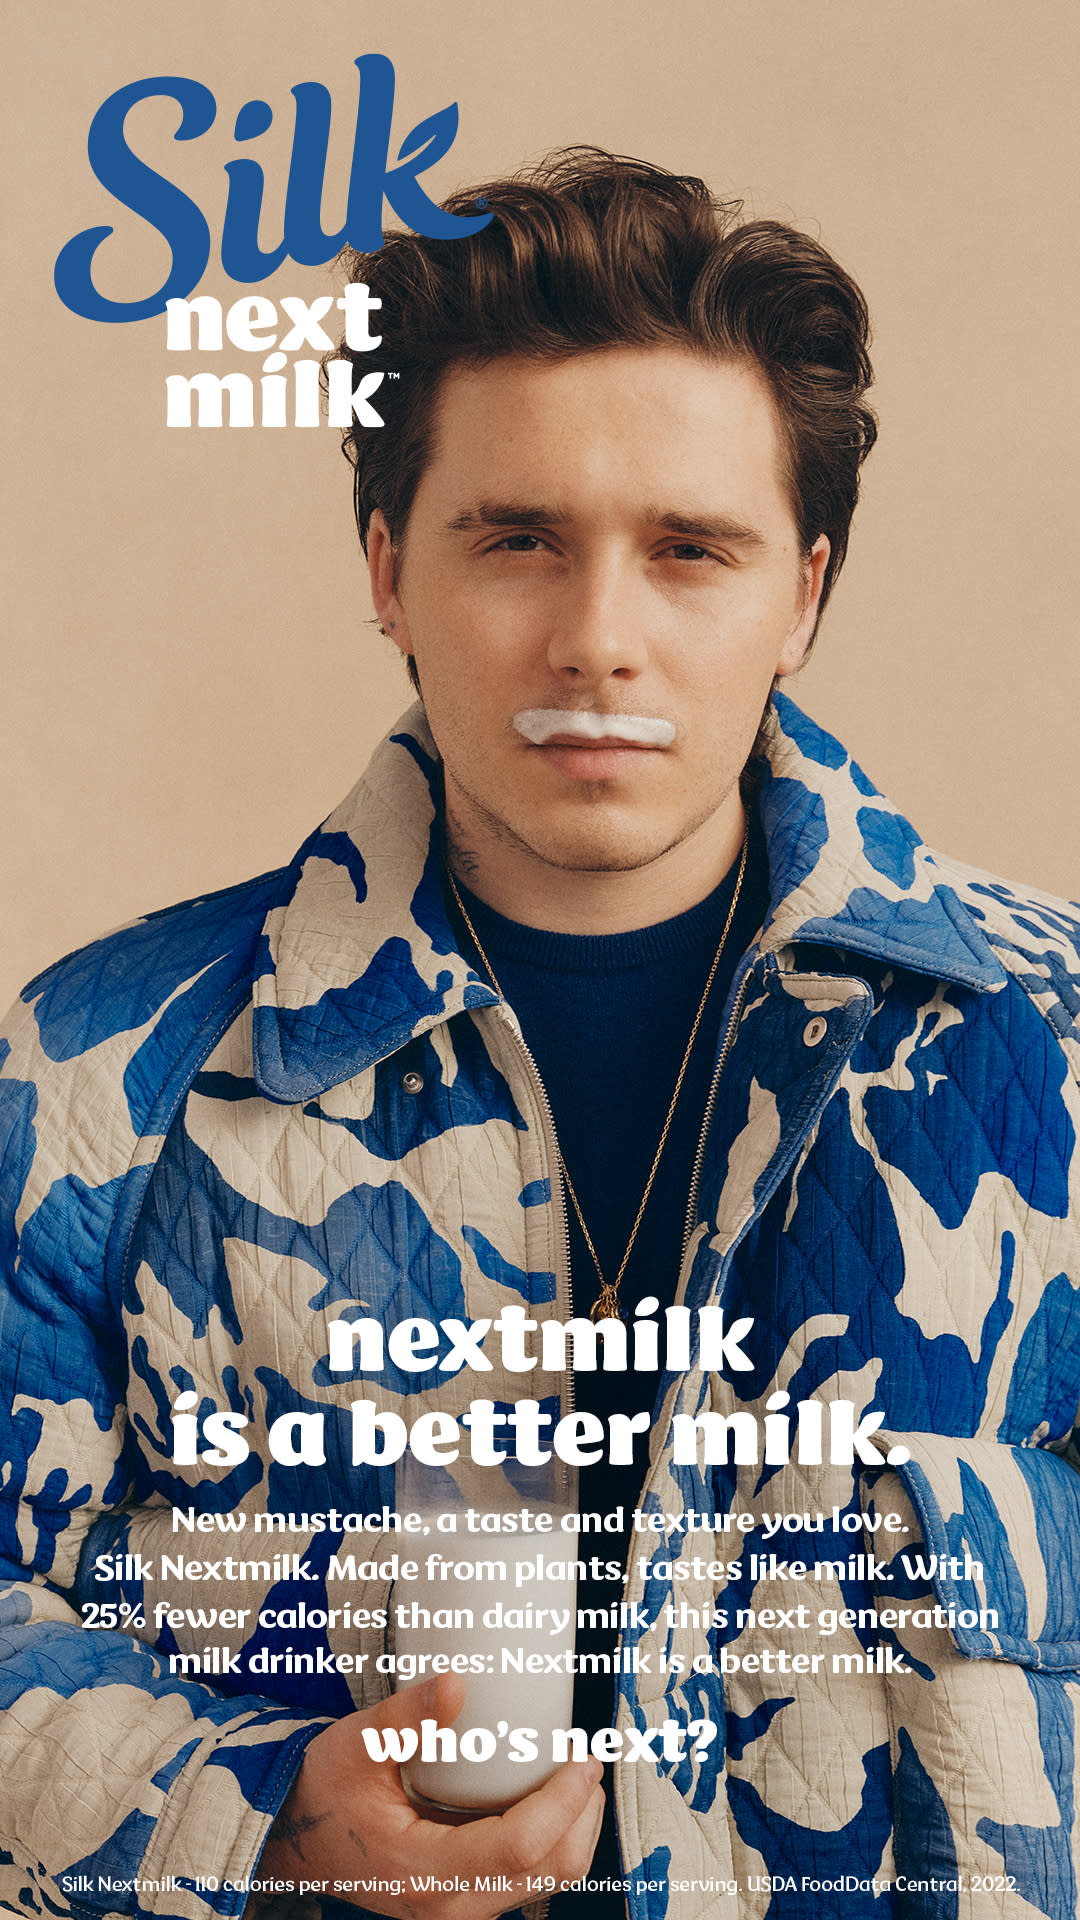 Peltz Beckham's ad for Silk Nextmilk, where he recreates the iconic milk mustache his dad, David Beckham, posed with in a 